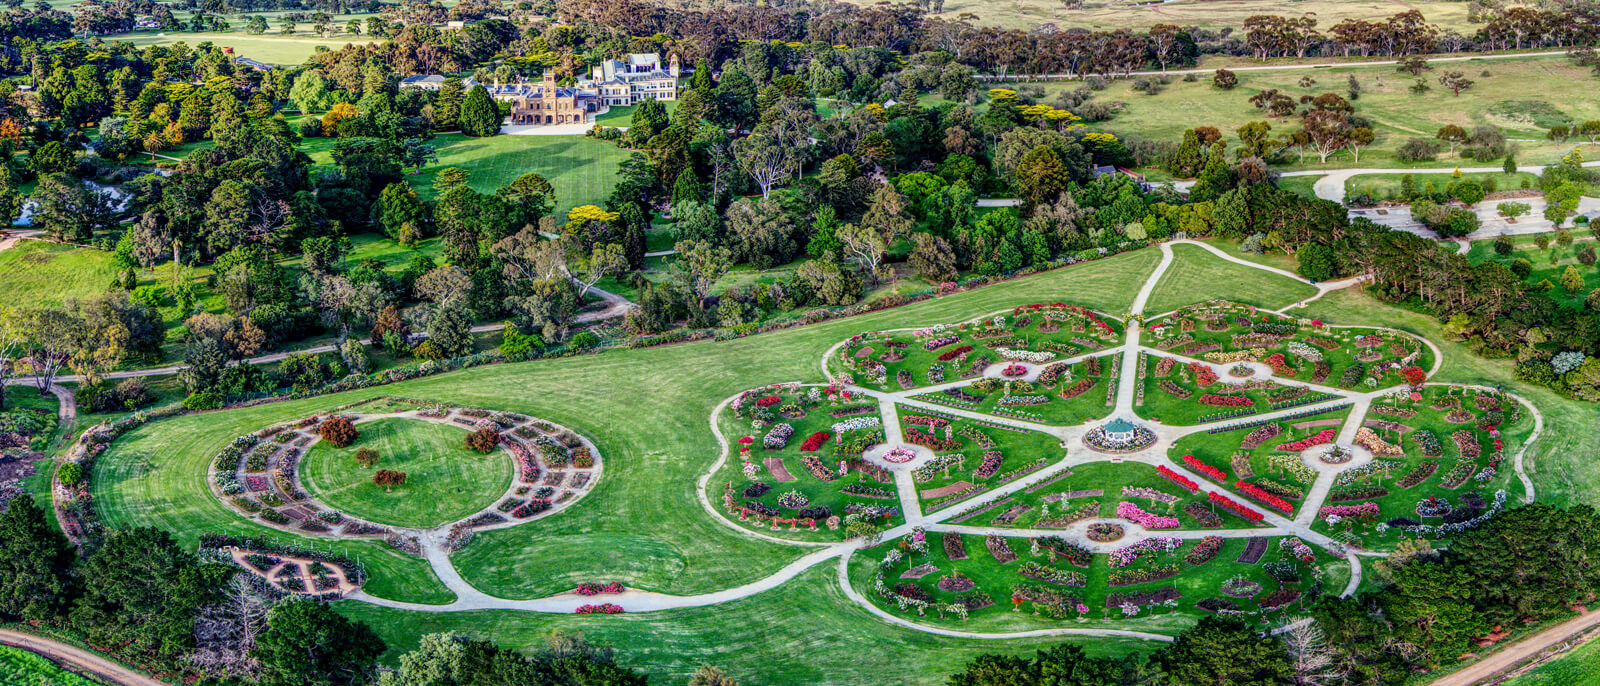 Werribee Park Visitor Guide Map by Parks Victoria